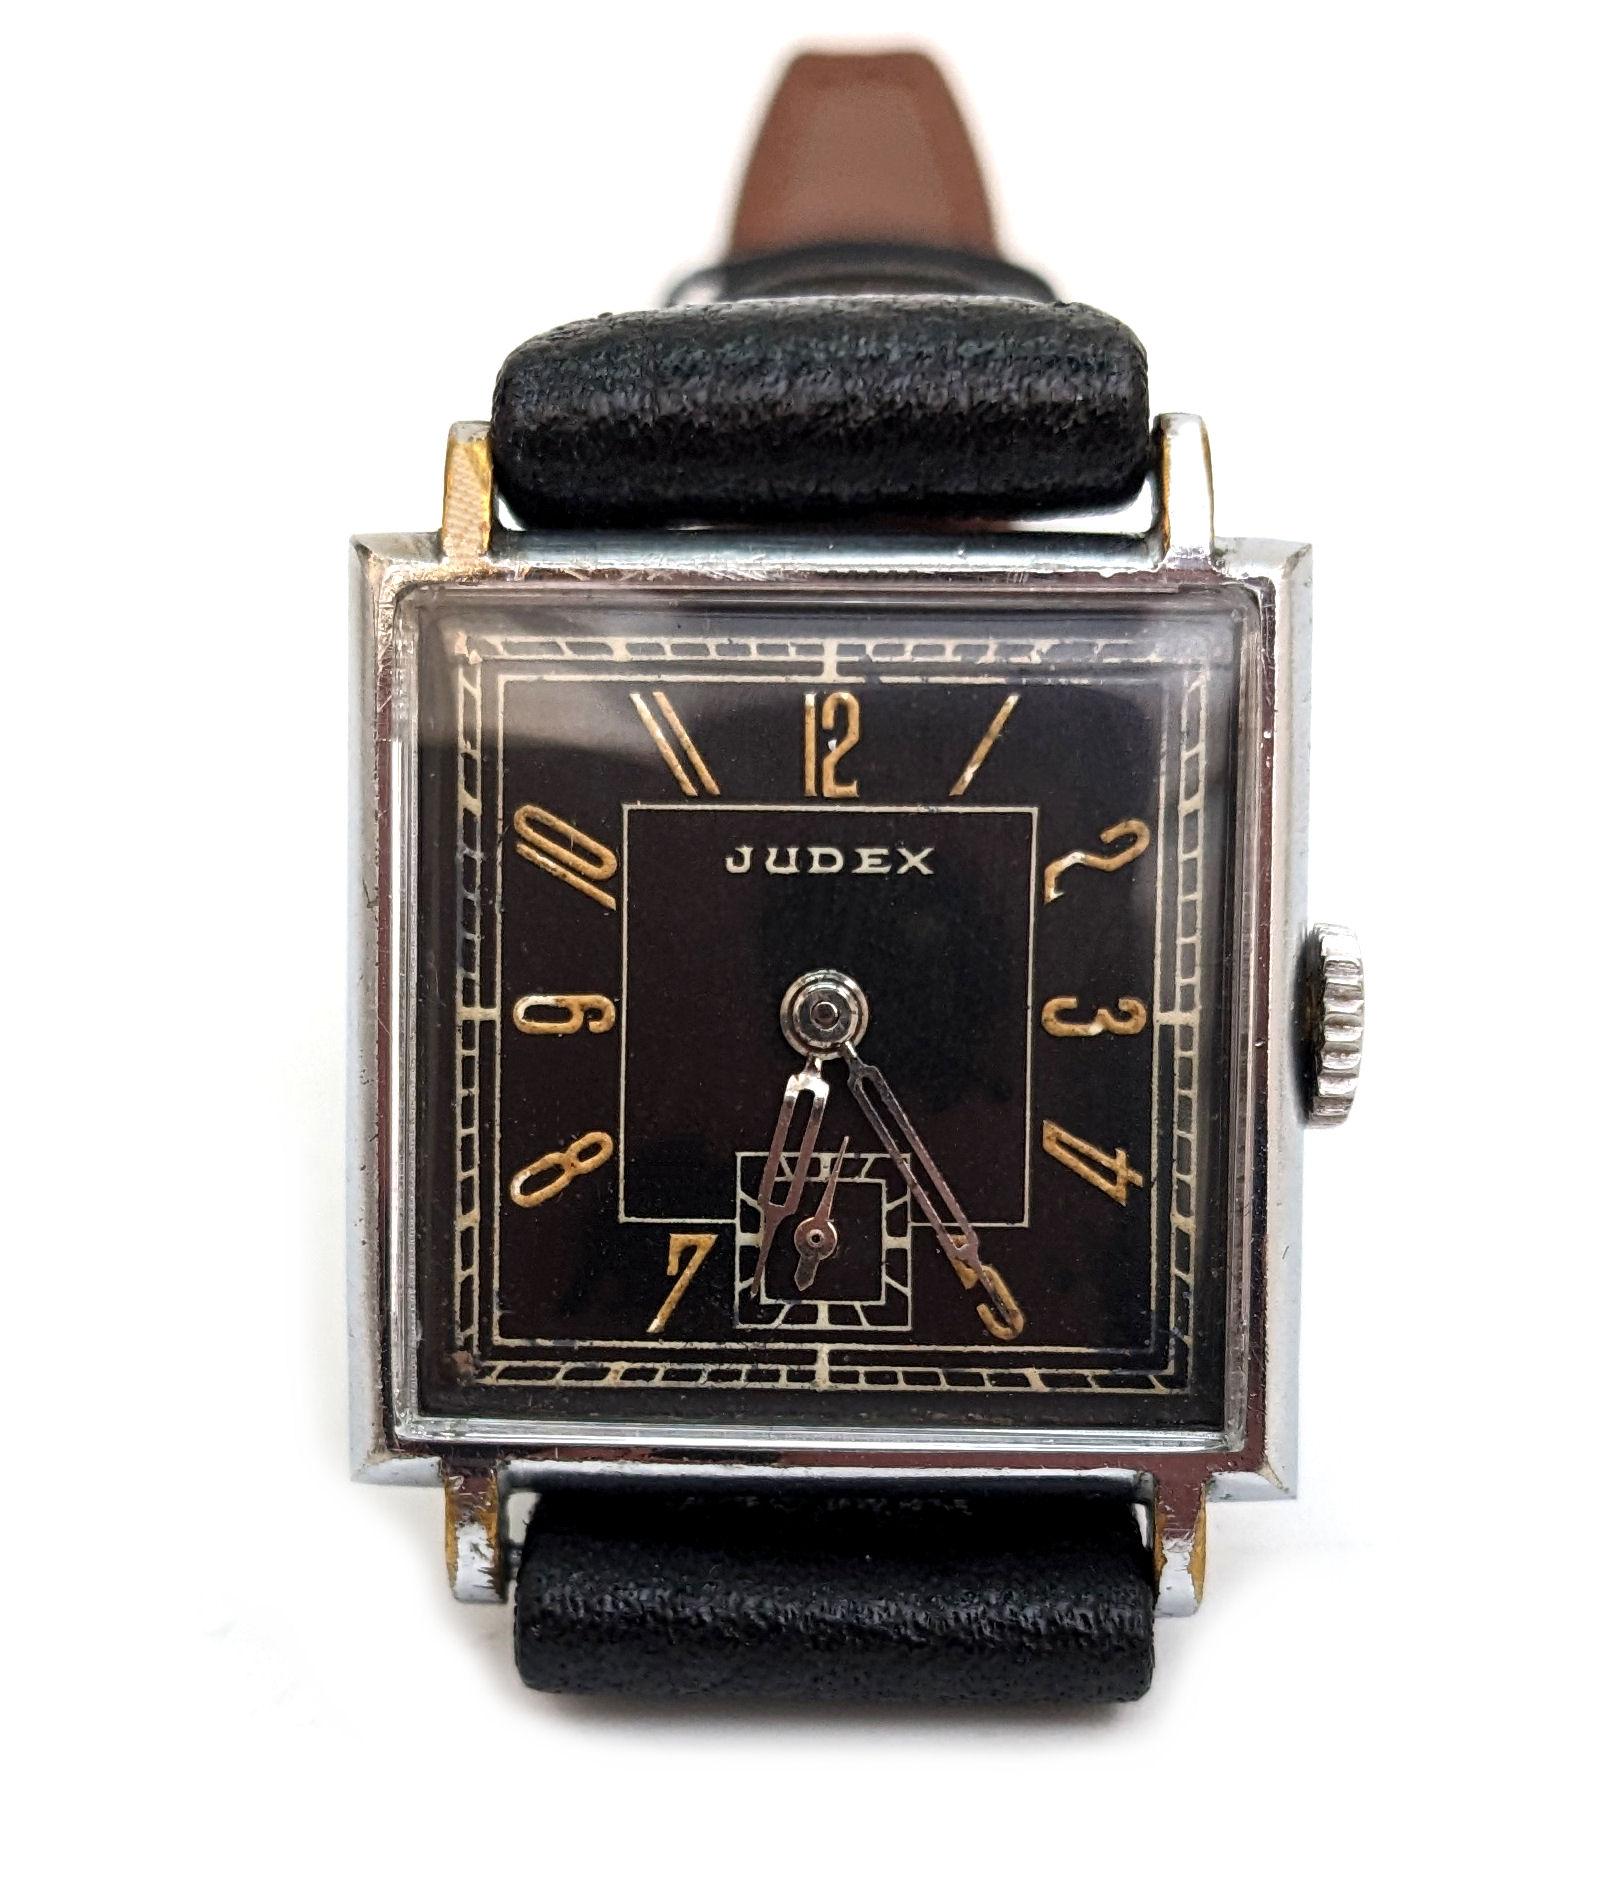 Art Deco Gents Manual Wrist Watch By Judex, c1930s In Good Condition For Sale In Westward ho, GB